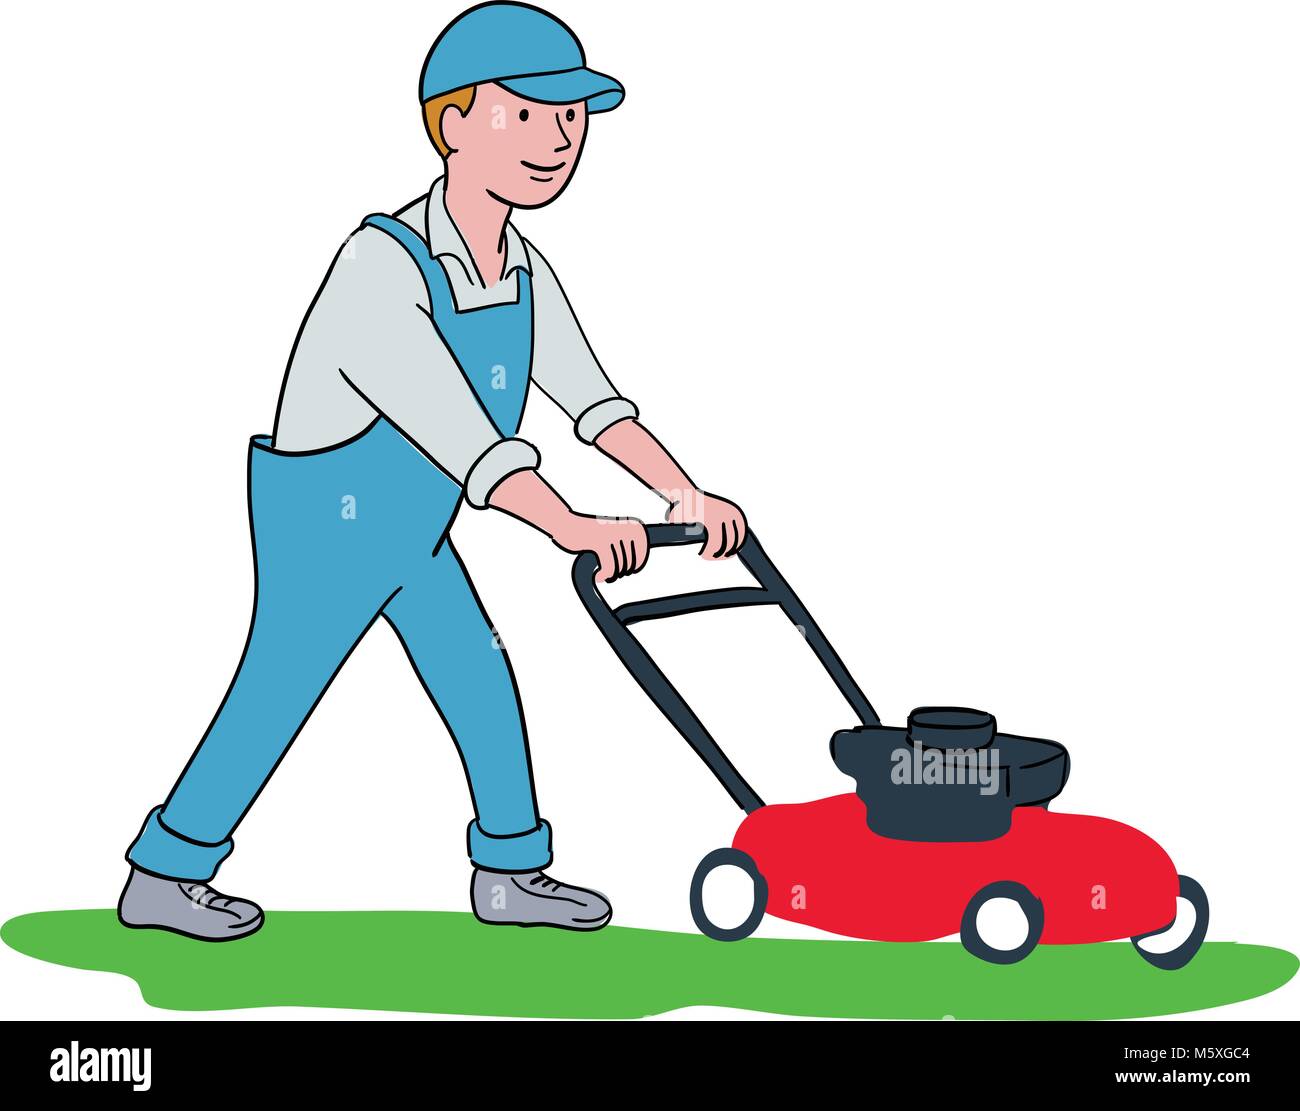 Man Using Lawn Mower To Cut The Grass On Garden Vector Cartoon Stick Figure  Illustration Stock Illustration  Download Image Now  iStock